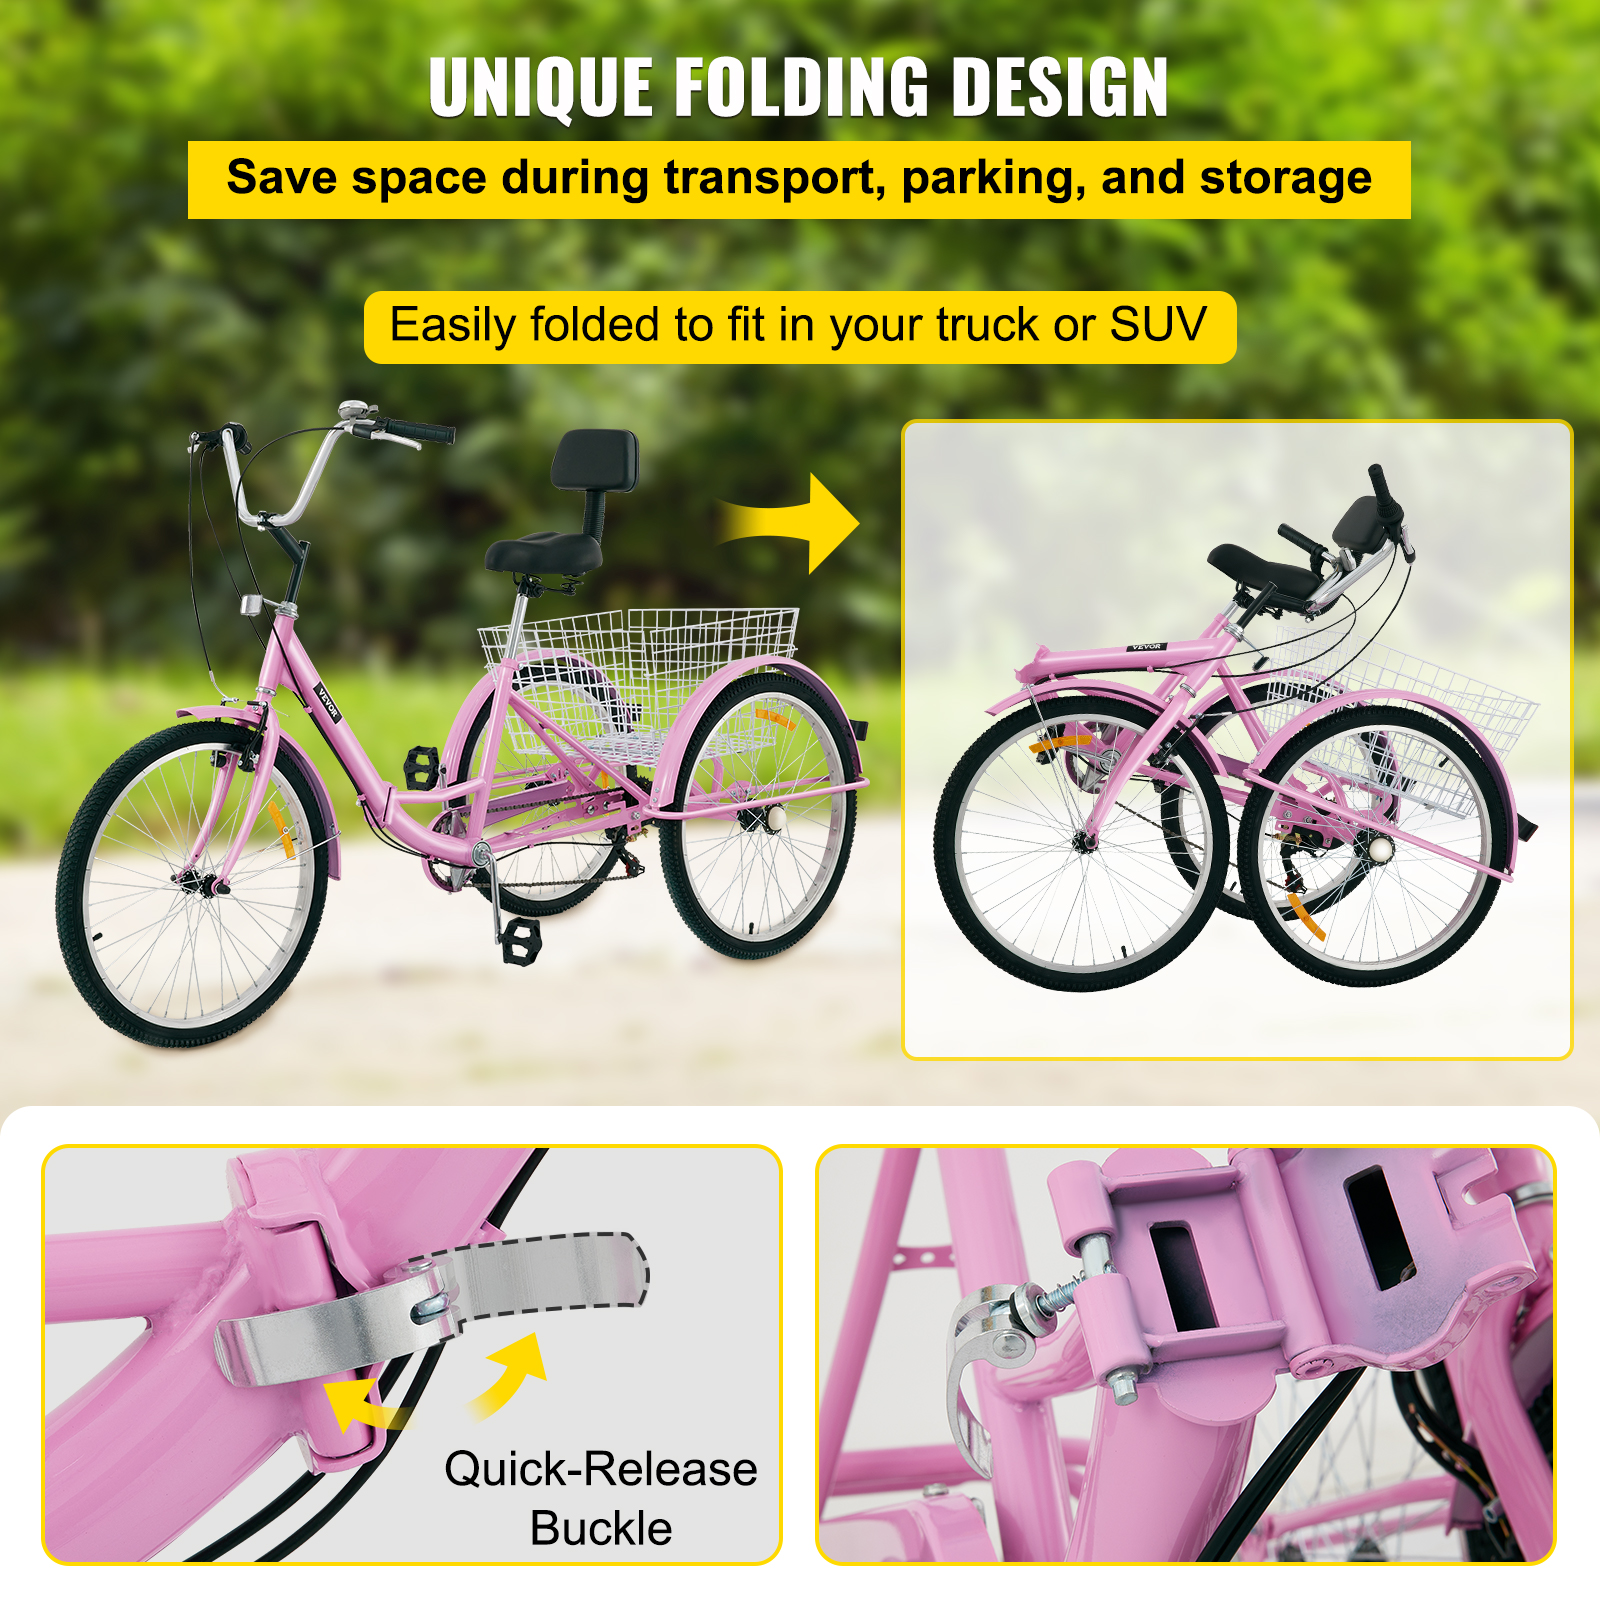 VEVOR Foldable Adult Tricycle 24 Wheels,7-Speed Trike, 3 Wheels Colorful Bike with Basket, Portable and Foldable Bicycle for Adults Exercise Shopping Picnic Outdoor Activities,Pink - image 4 of 9